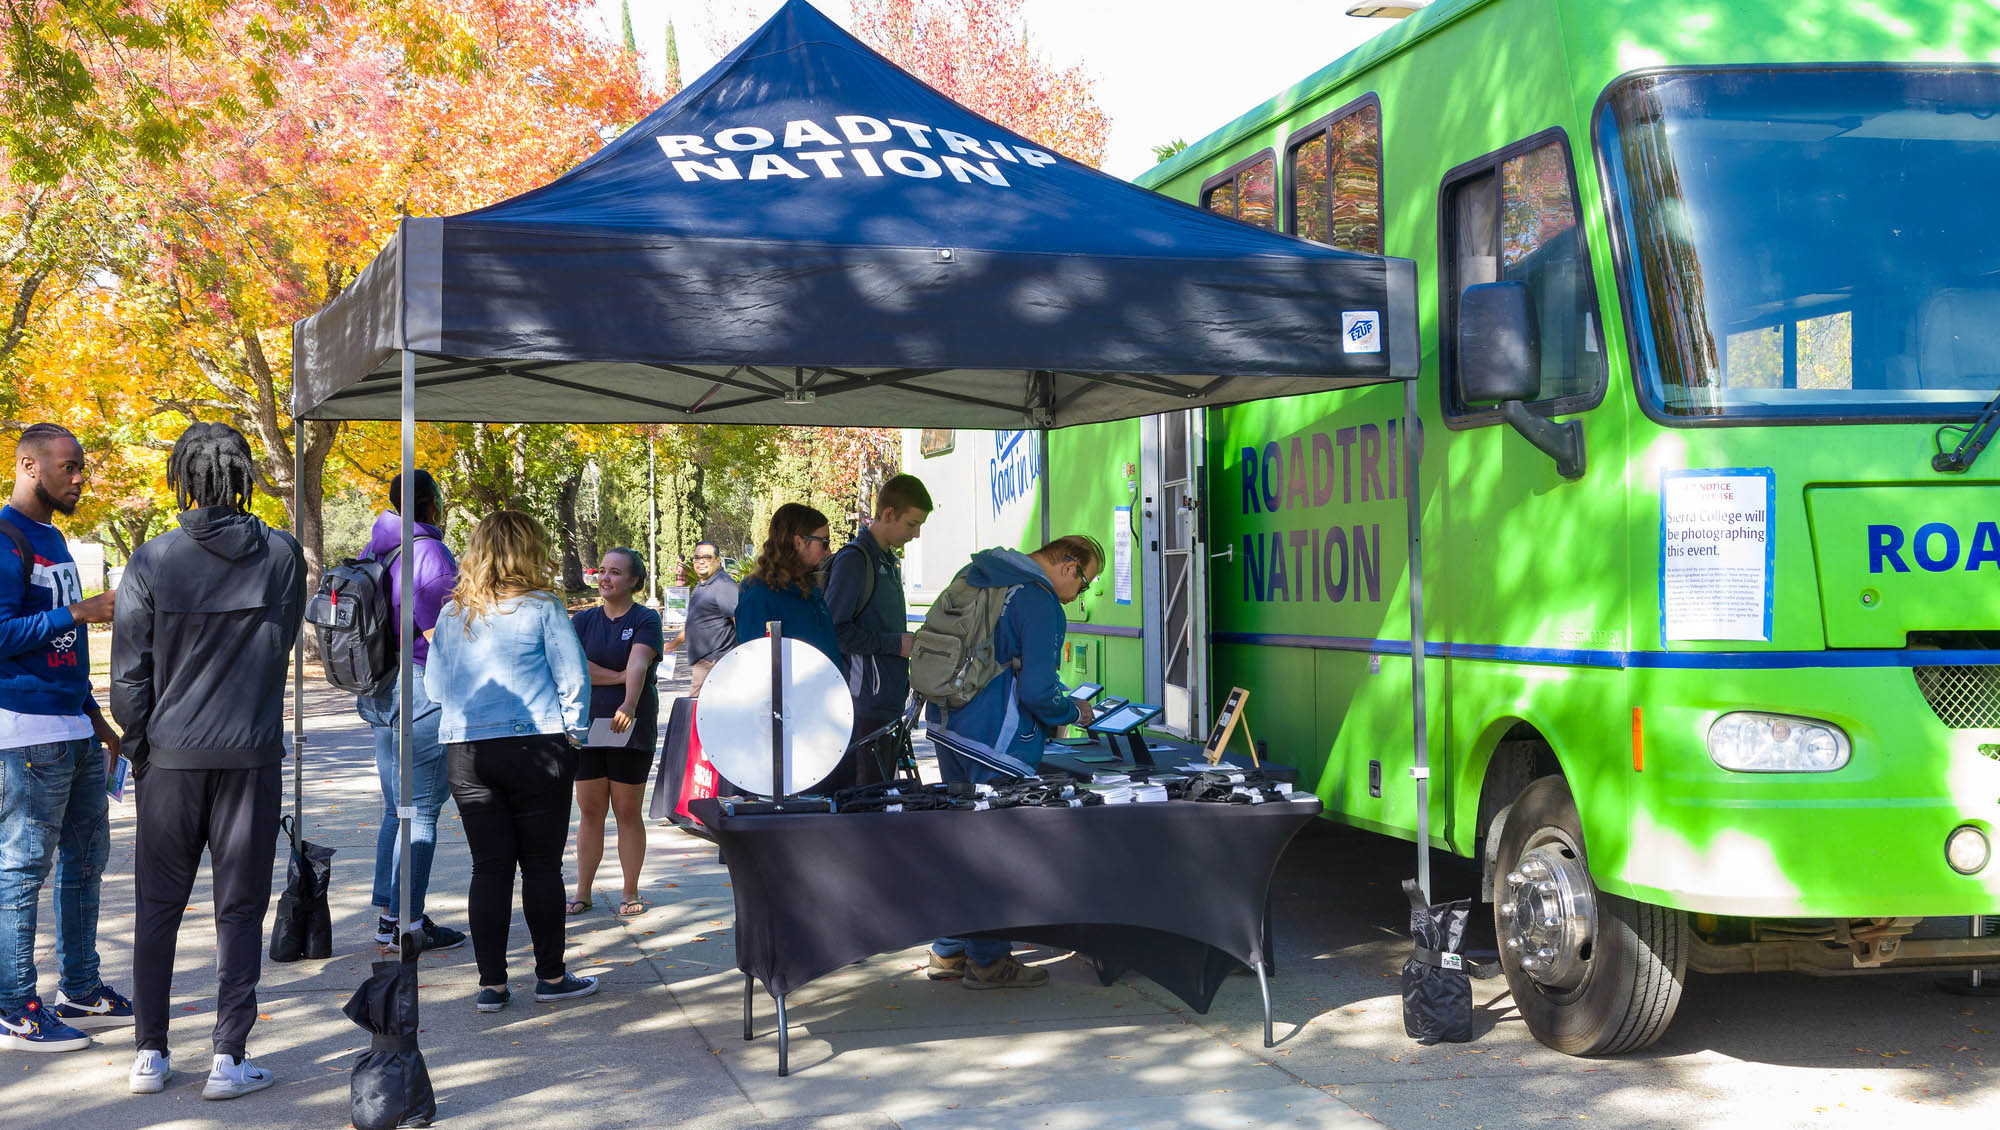 Sierra College students gathering at the Roadtrip Nation bus